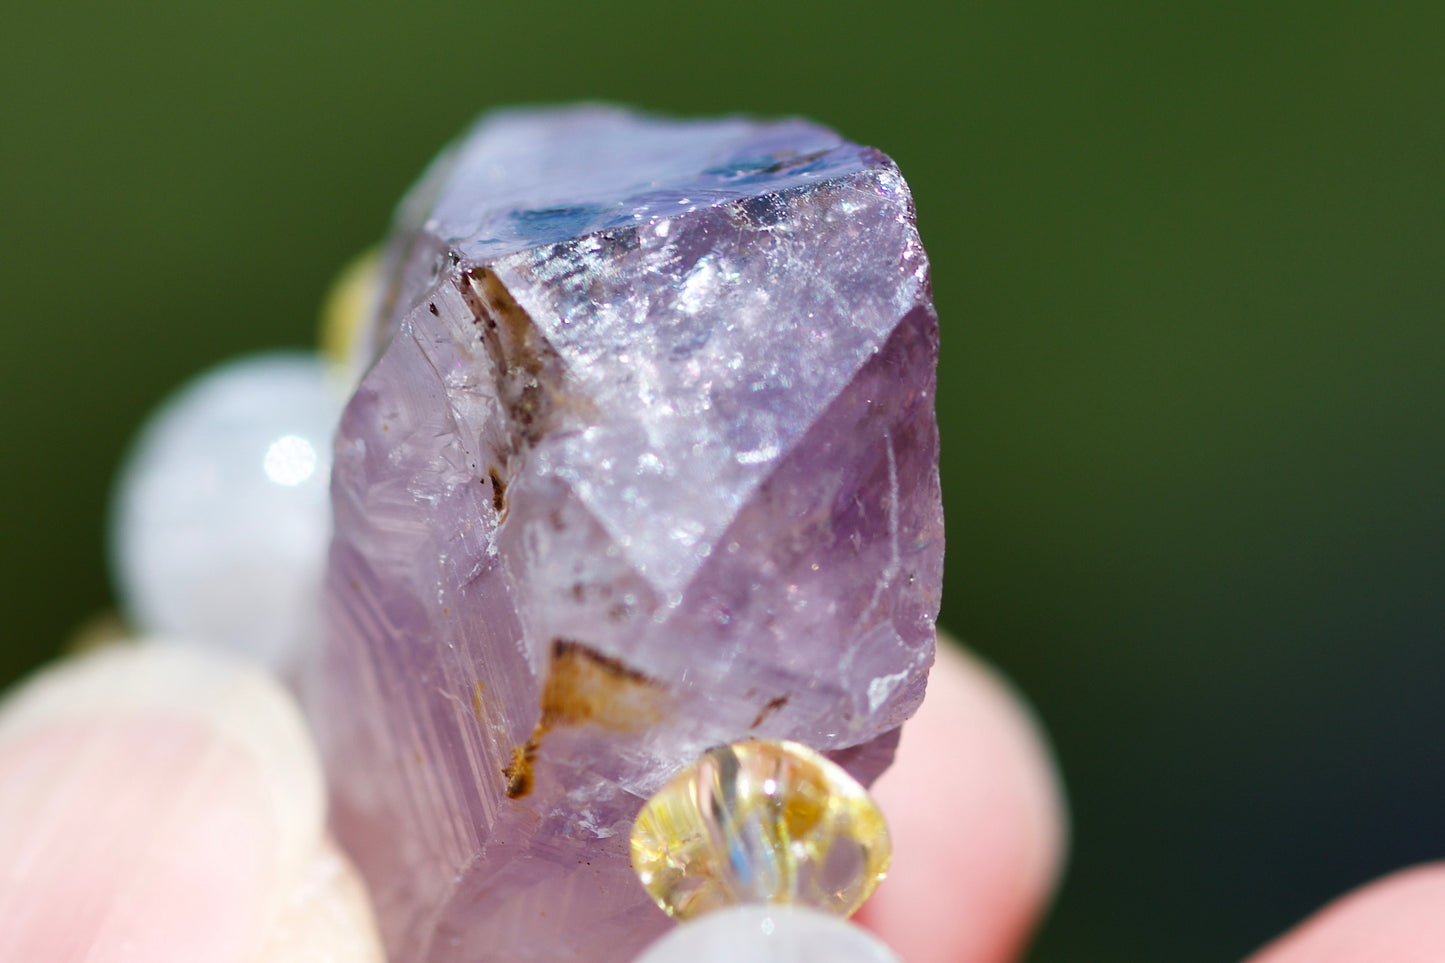 Amethyst Crystal Point with Inclusions, Clear Quartz, Milky Quartz, Iolite, and Sterling Silver Necklace